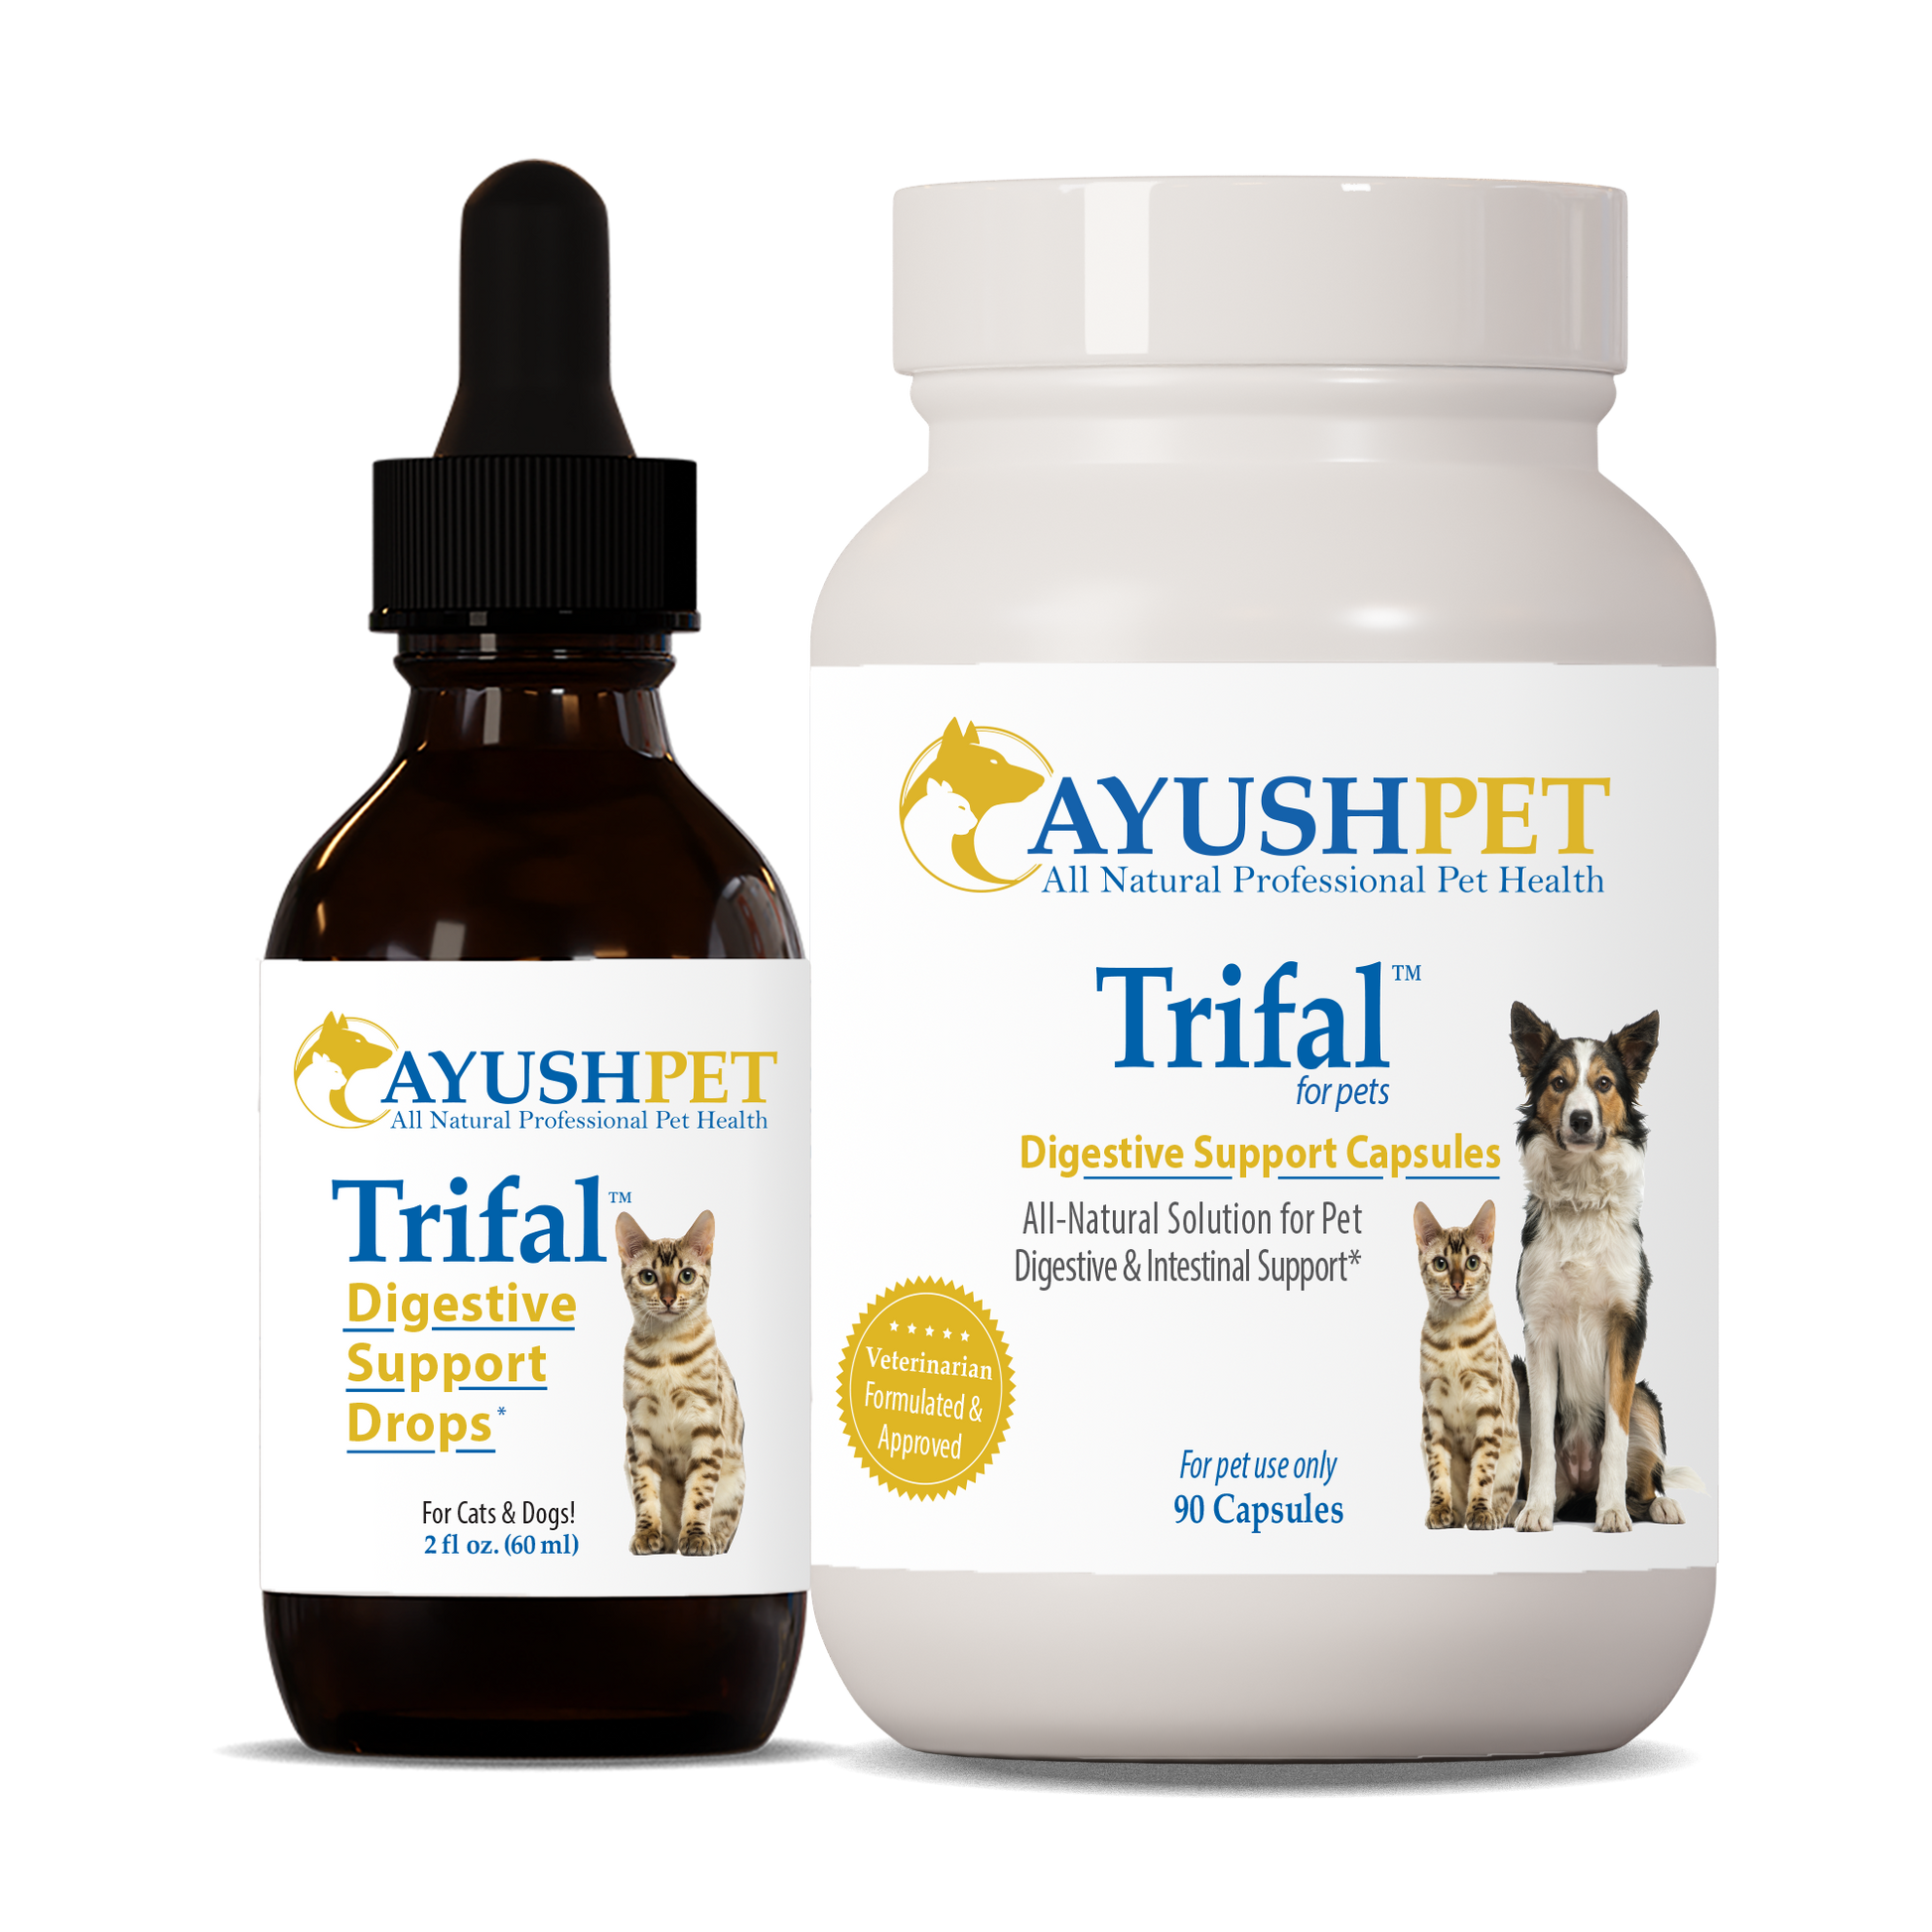 pet trifal bundle drops capsules provides digestive and elimination support and is also considered to have antioxidant properties which promotes healthy vision by ruved herbal supplements and ayush herbs